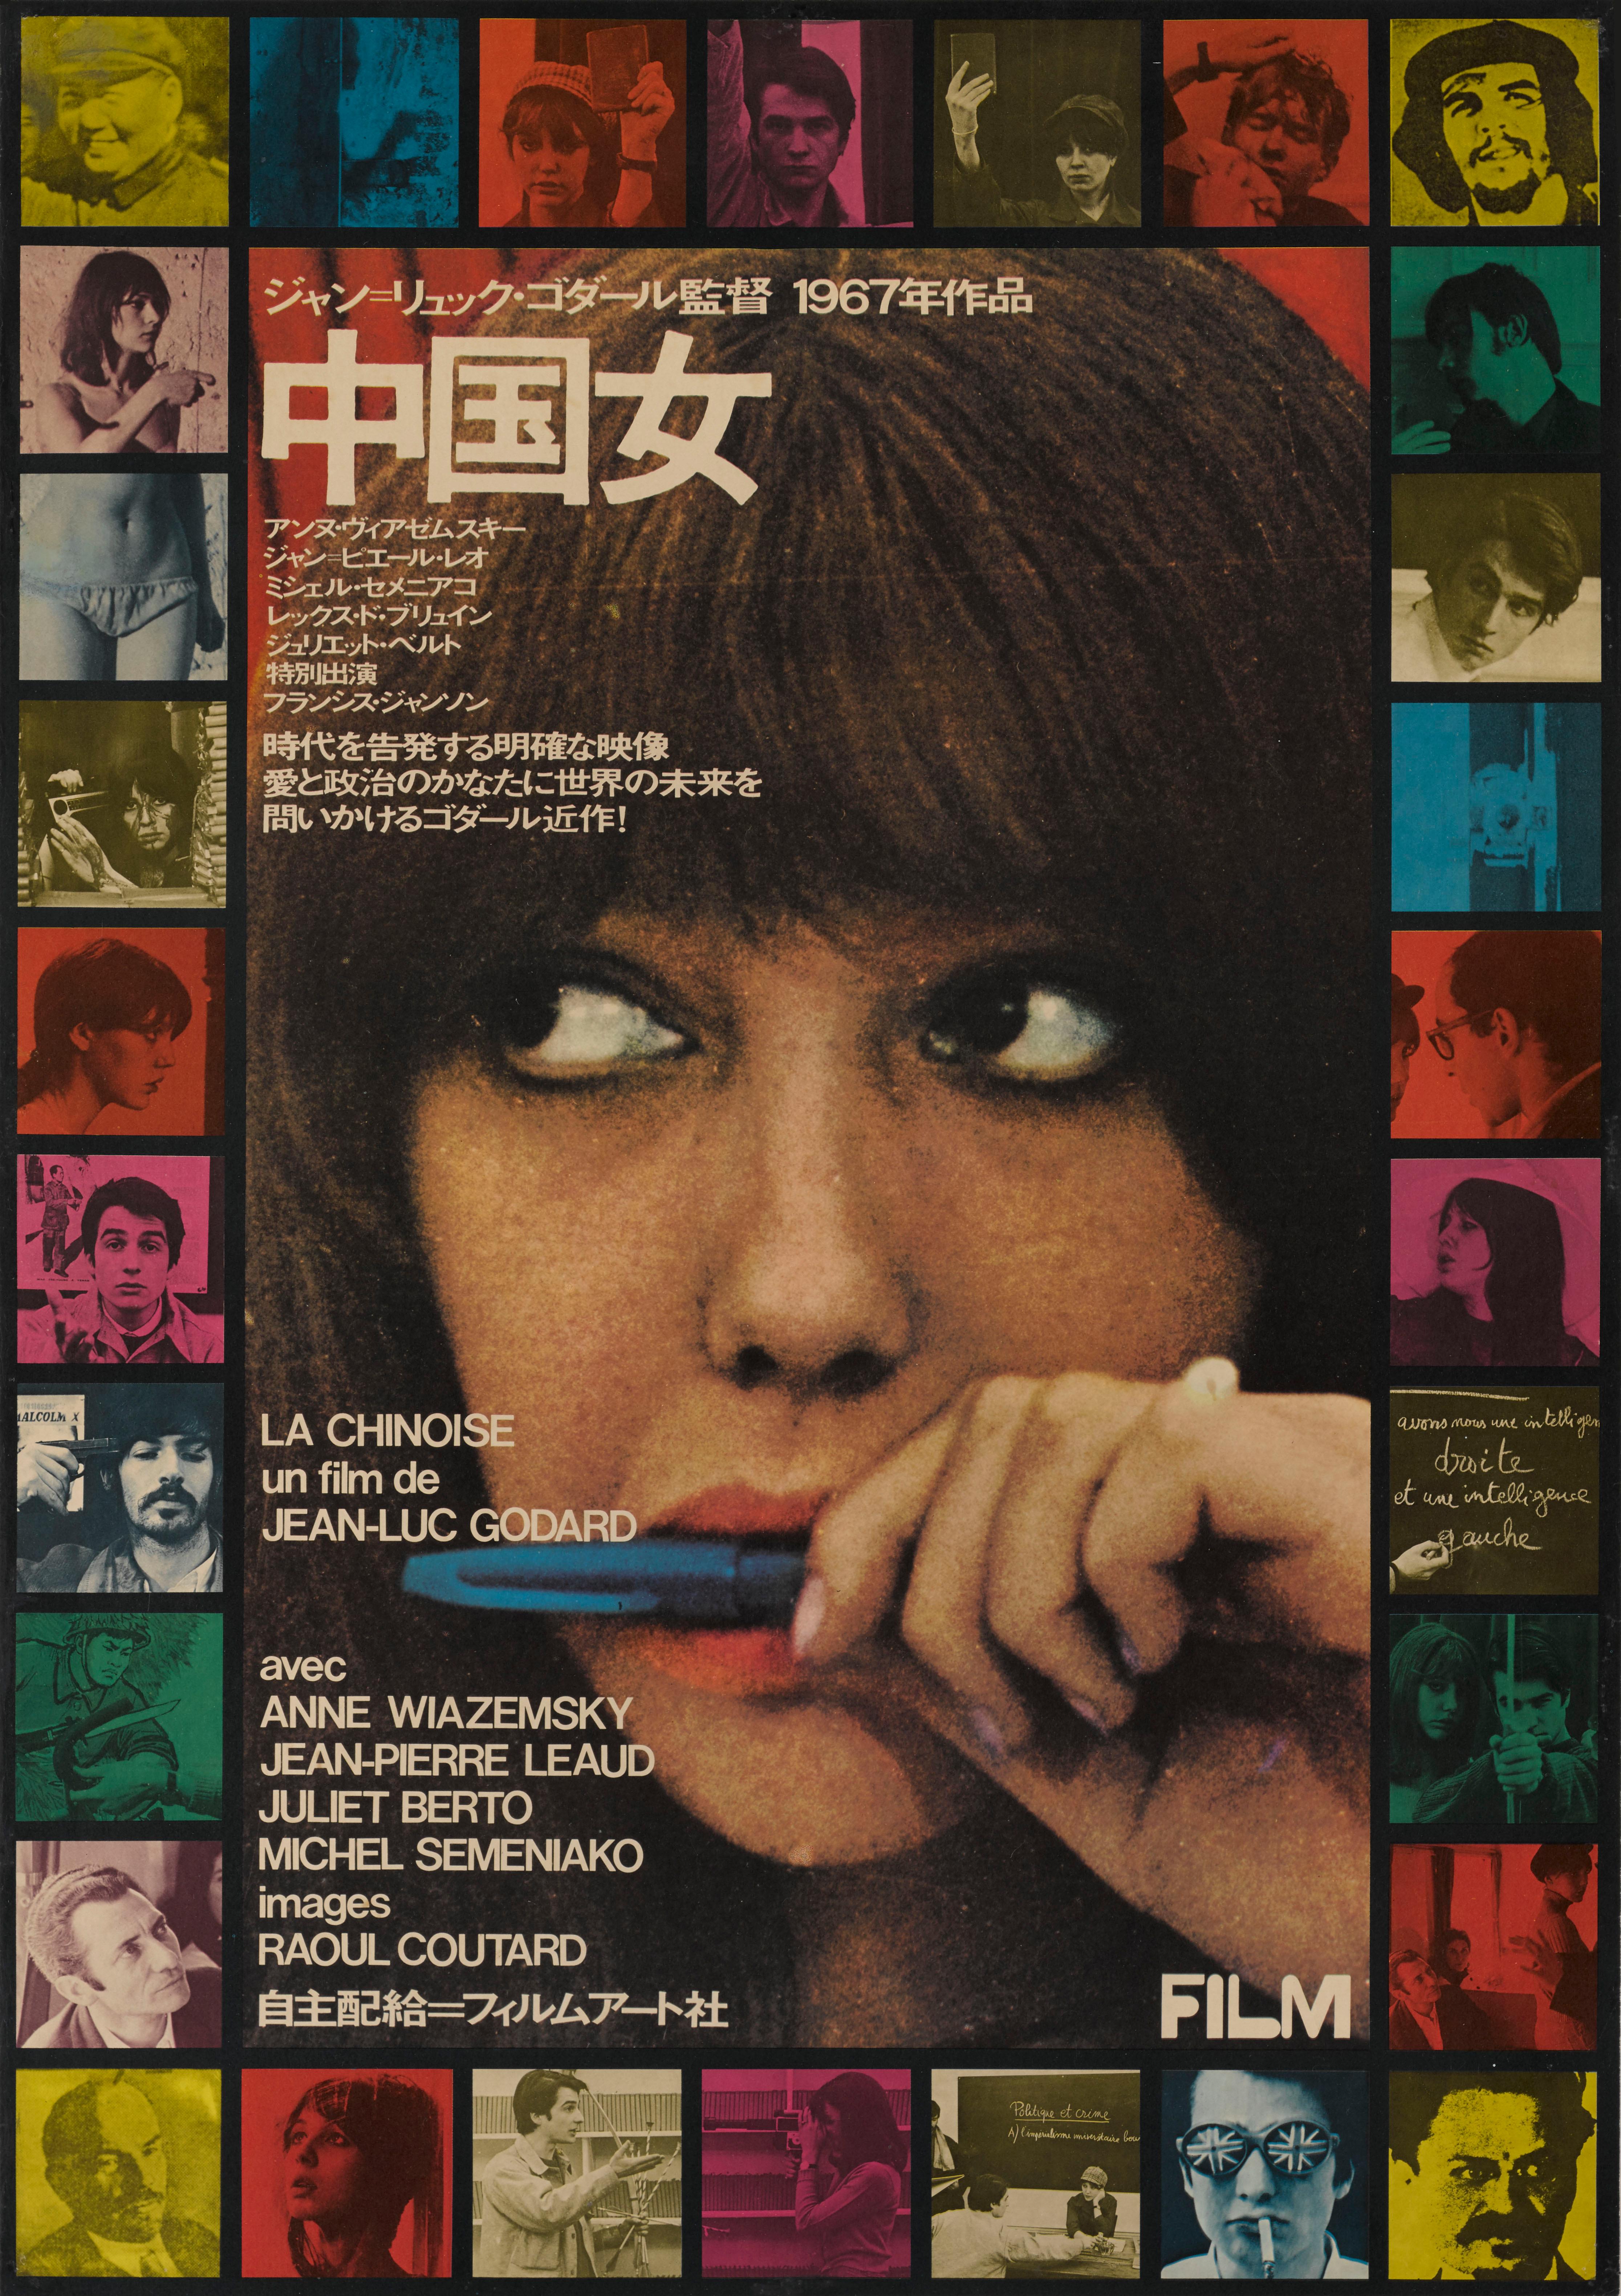 Original Japanese film poster used in Japan when the film was first shown in 1967.
This film was directed by Jean-Luc Godard and starred Anne Wiazemsky, Juliet Berto, Jean-Pierre Leaud, Francis Jeanson.
This may well be the best looking poster on